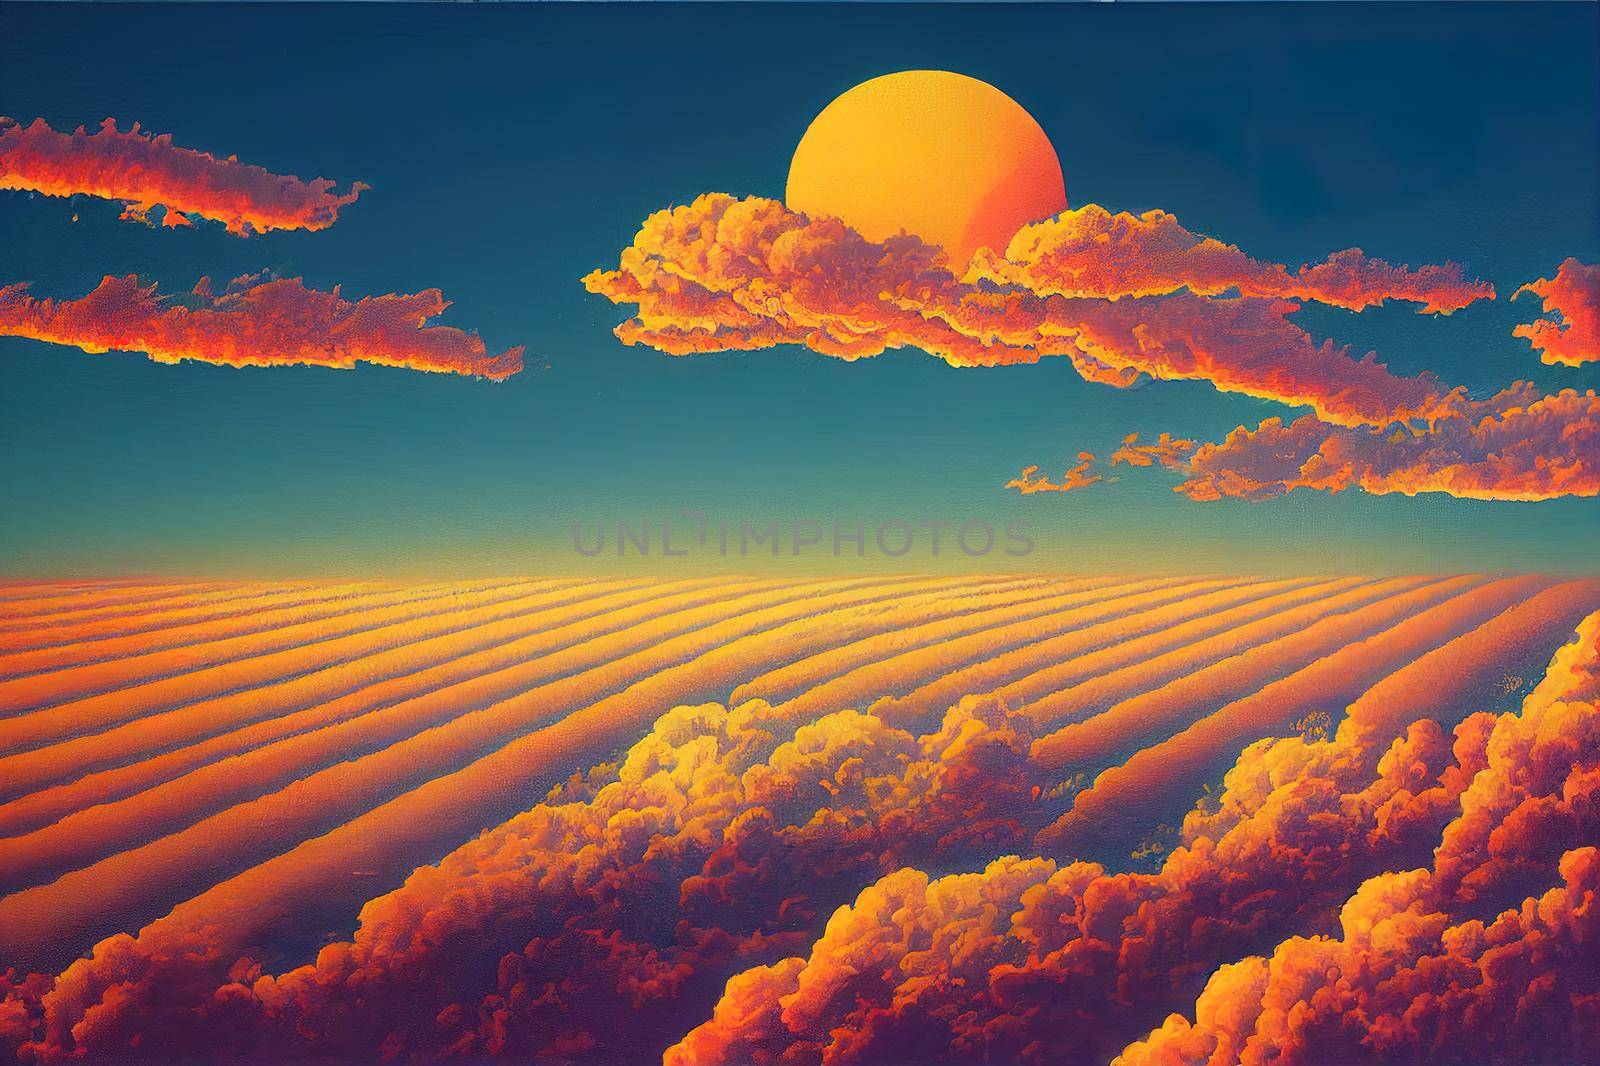 sky with clouds and sun. High quality illustration